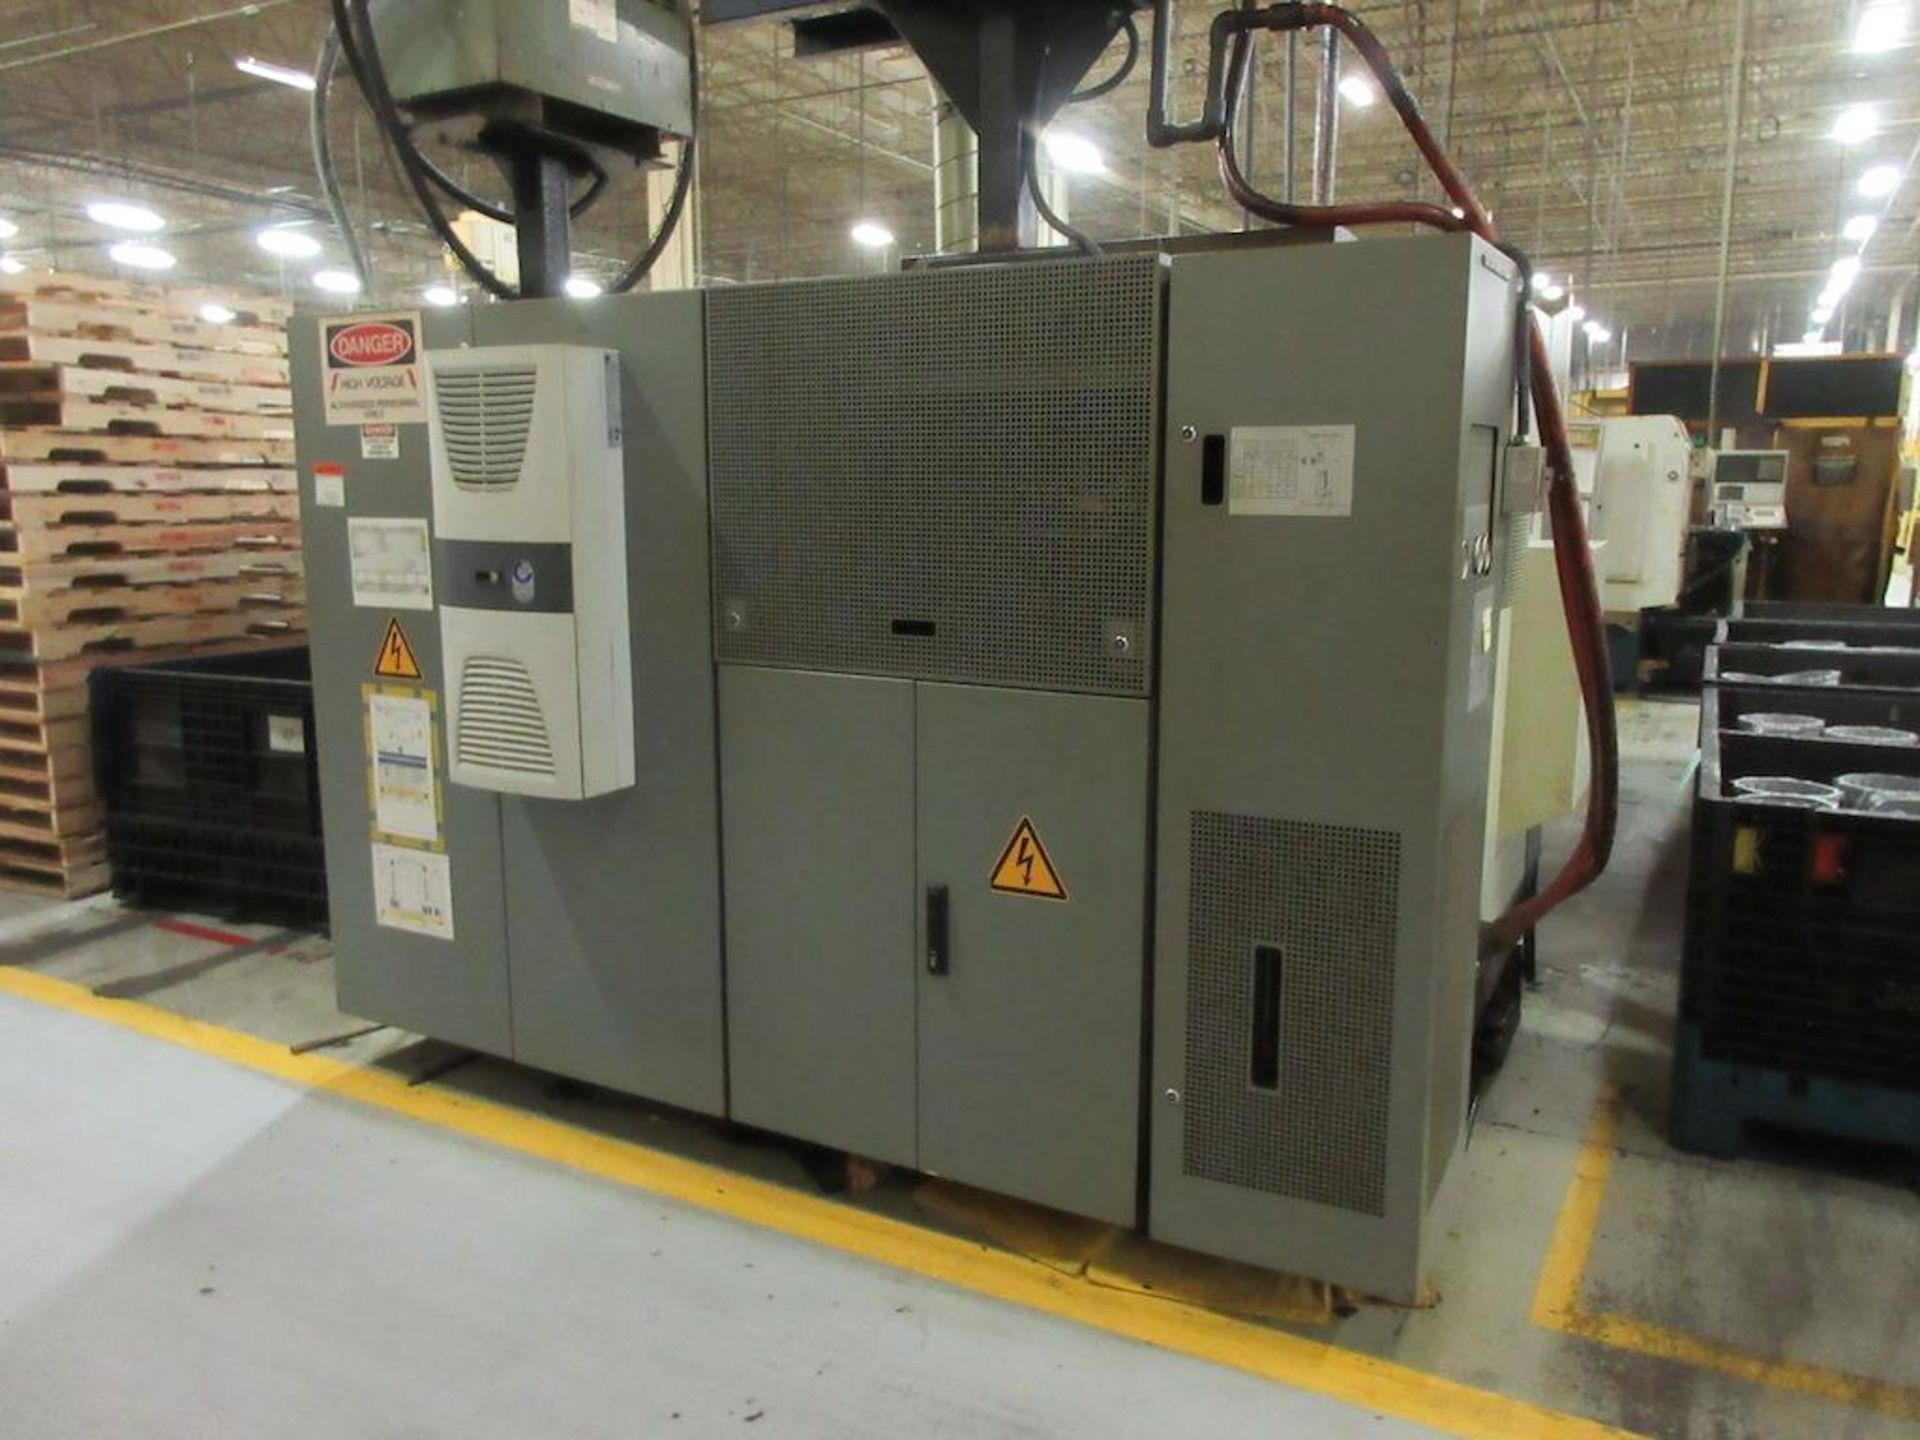 2004 DMG CNC Lathe, Model Twin 32, Twin Spindle, 4 Axis, CNC Control, Bar Material Diameter 32 mm, - Image 12 of 18